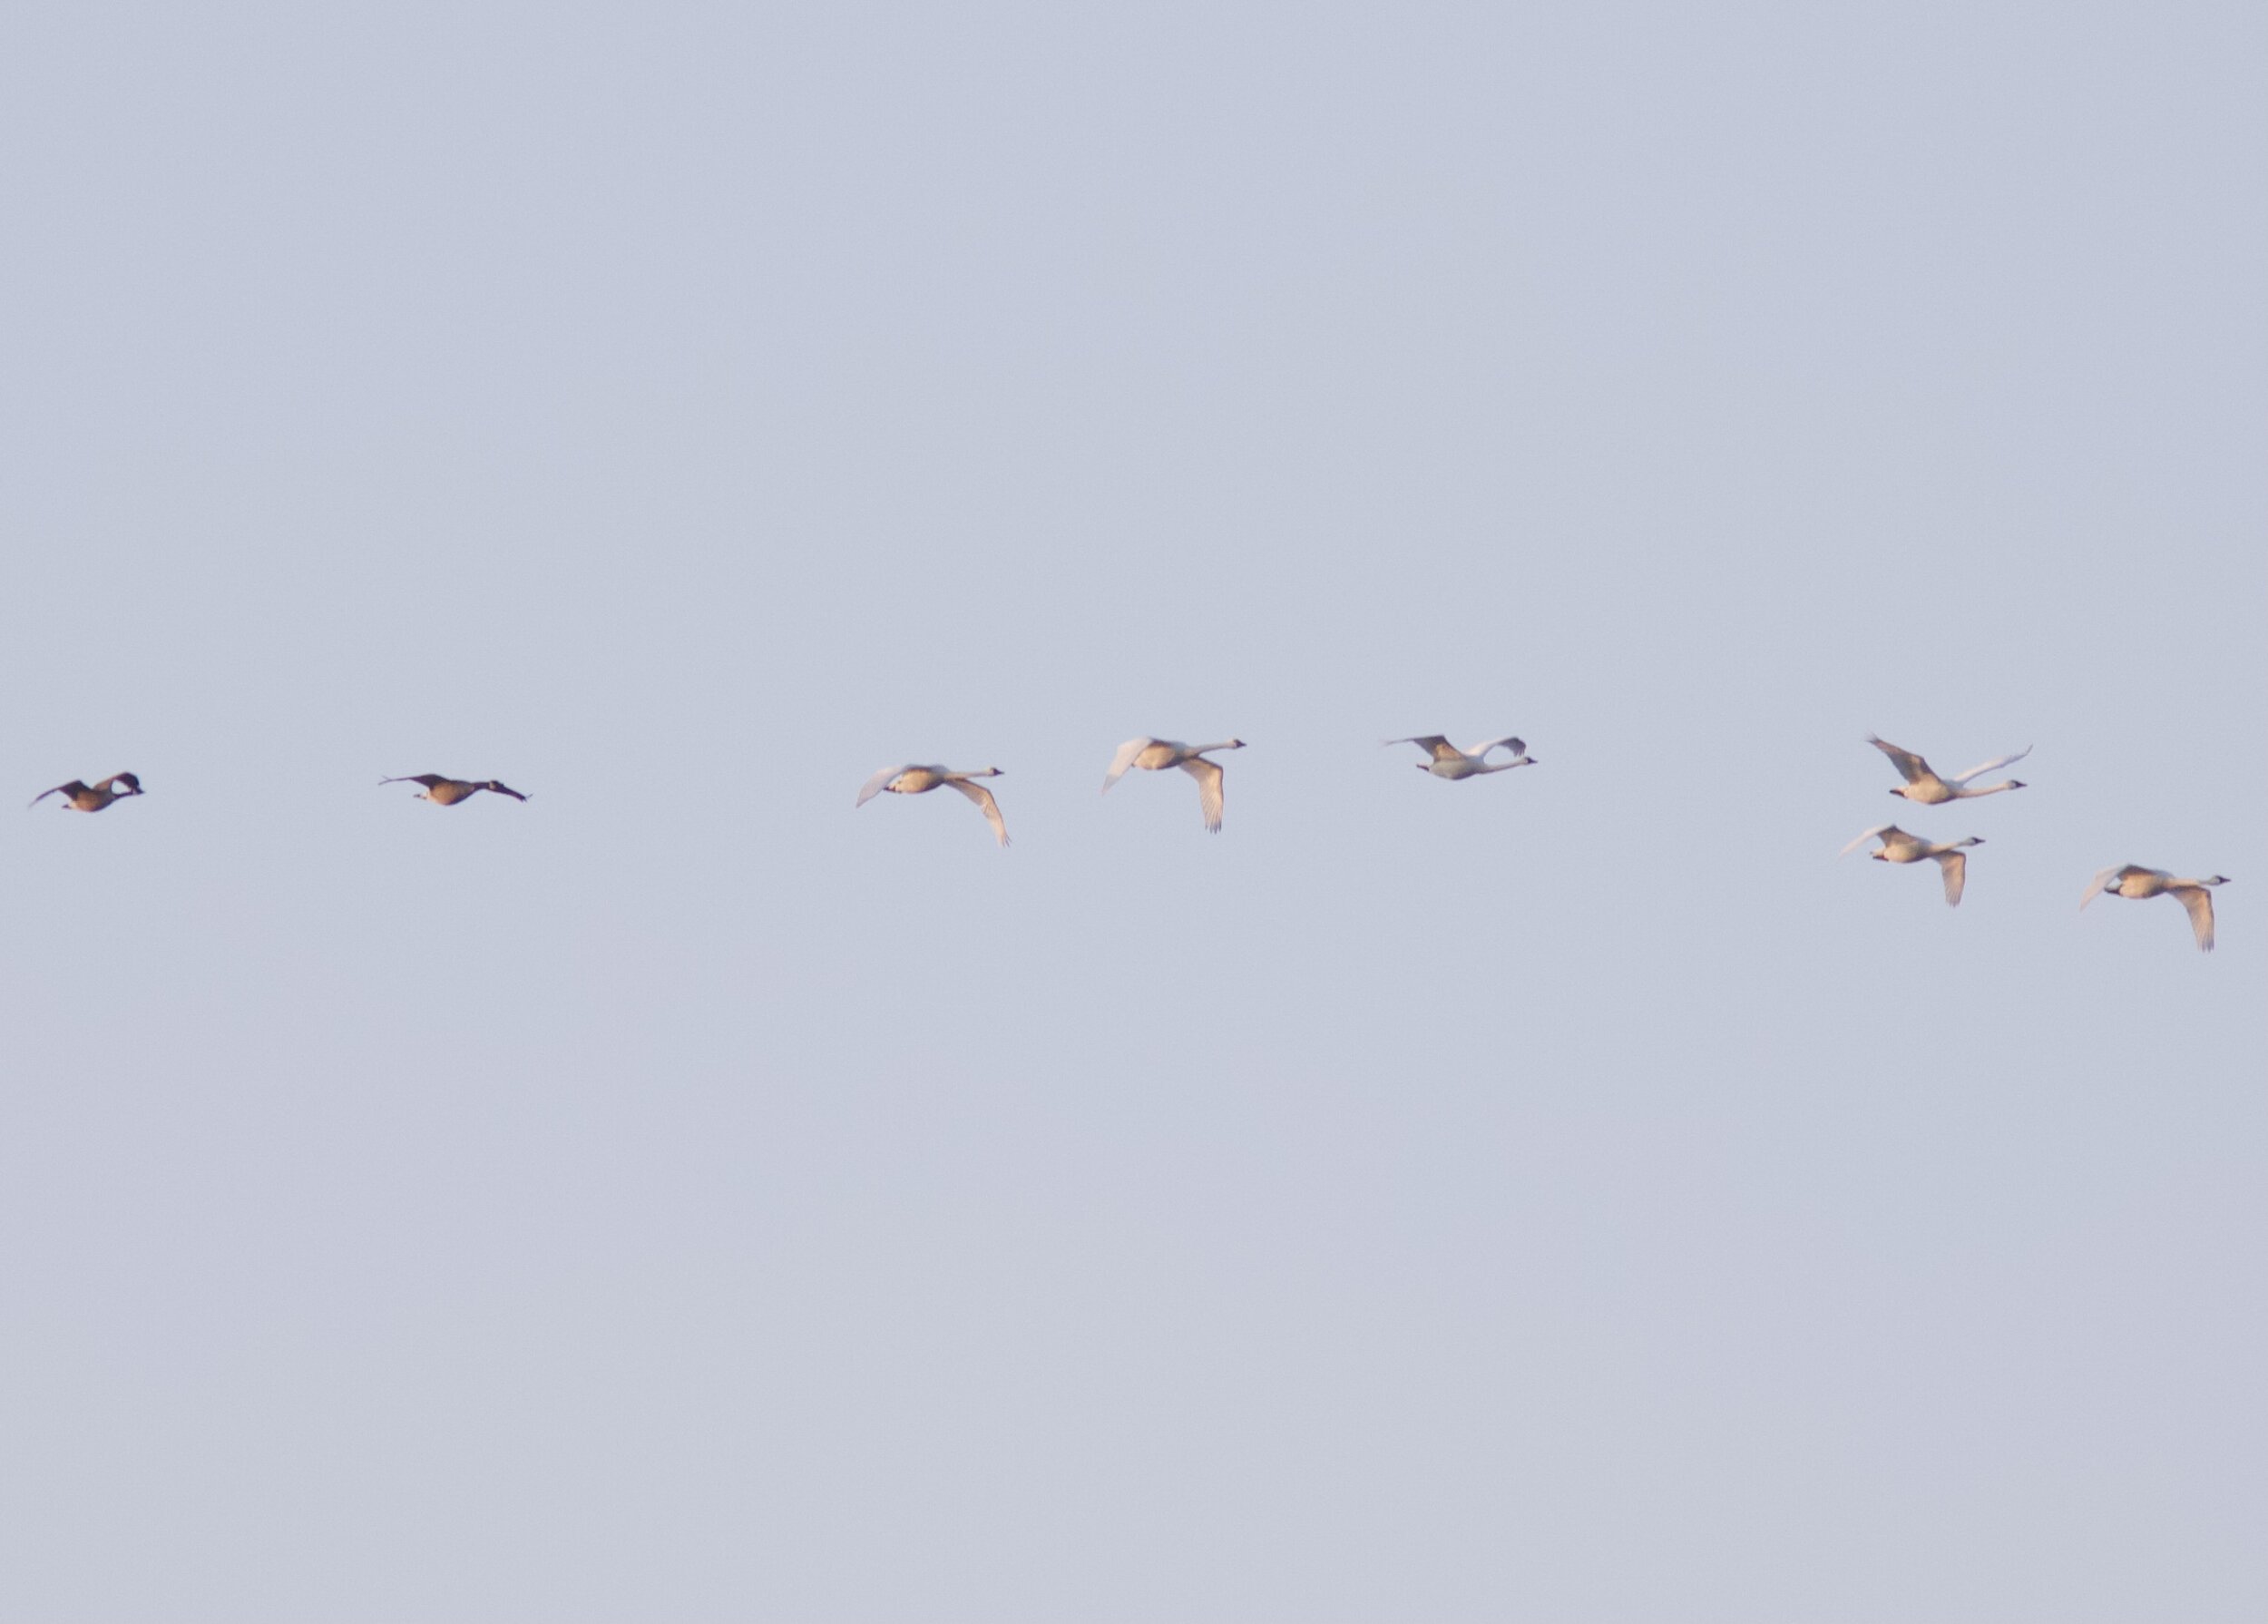 It’s always a treat to have Canada Geese mixed in with Tundra Swans